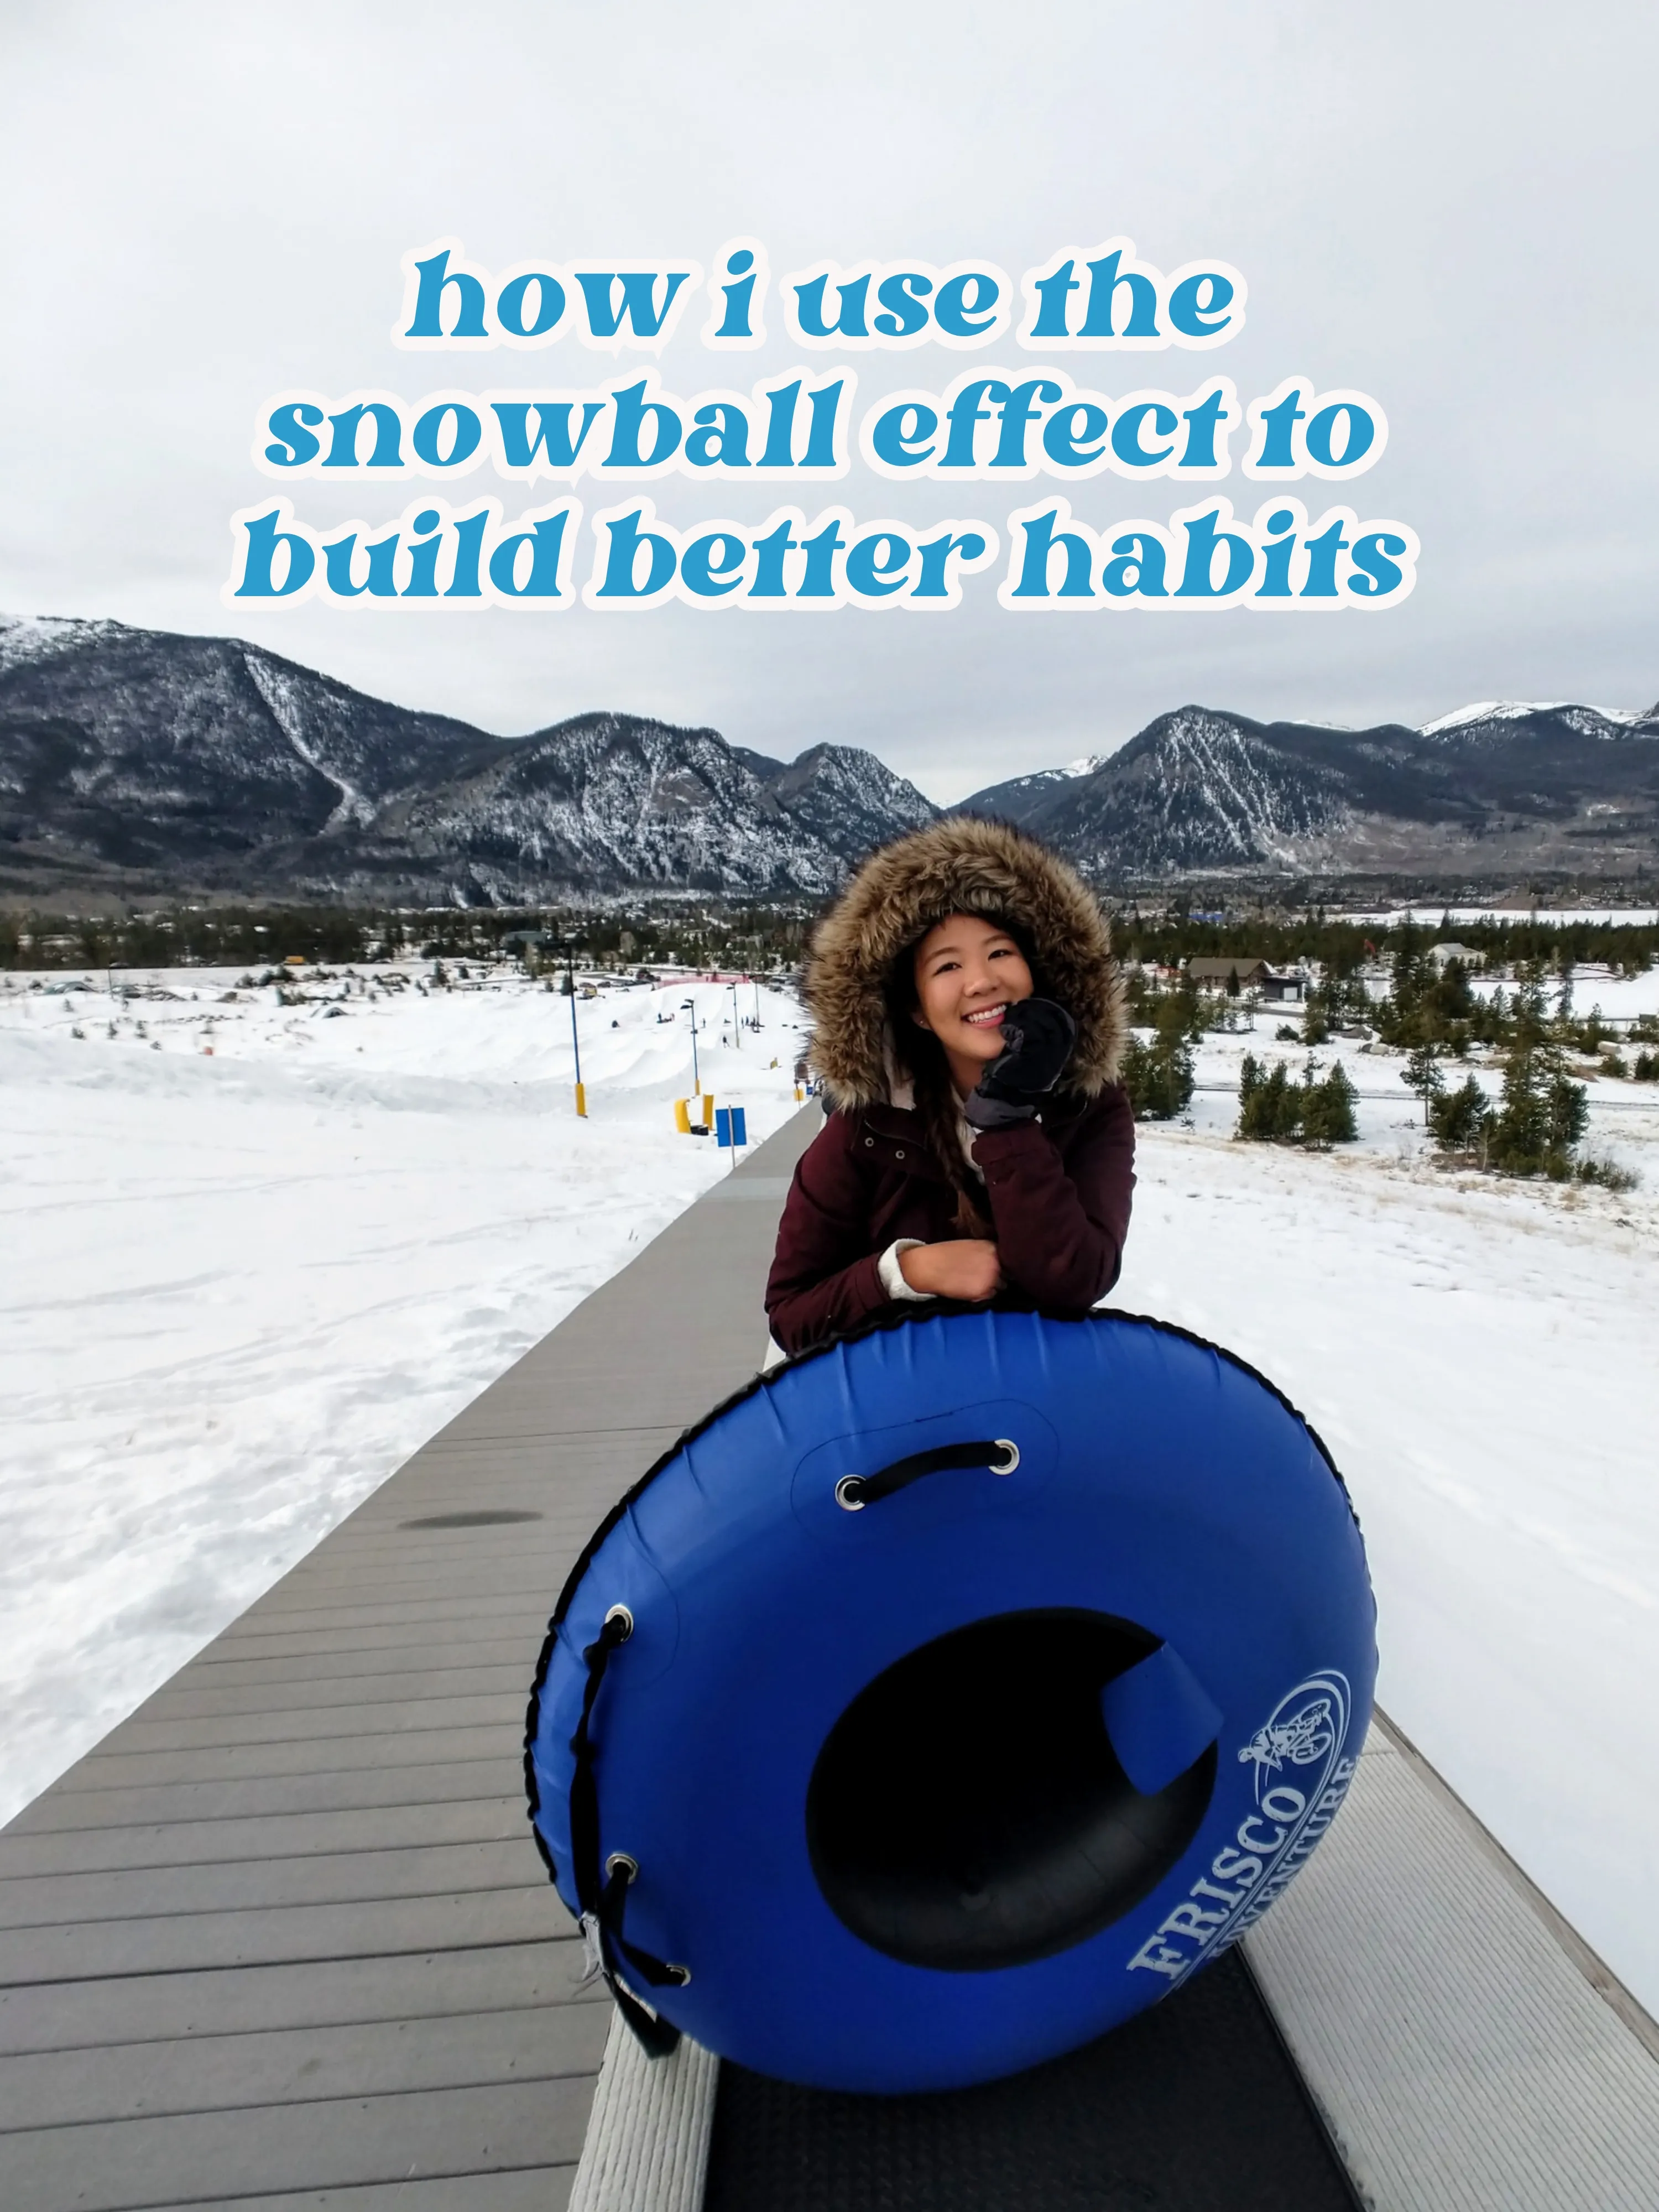 Is Your Business the Snowball Rolling Down the Hill